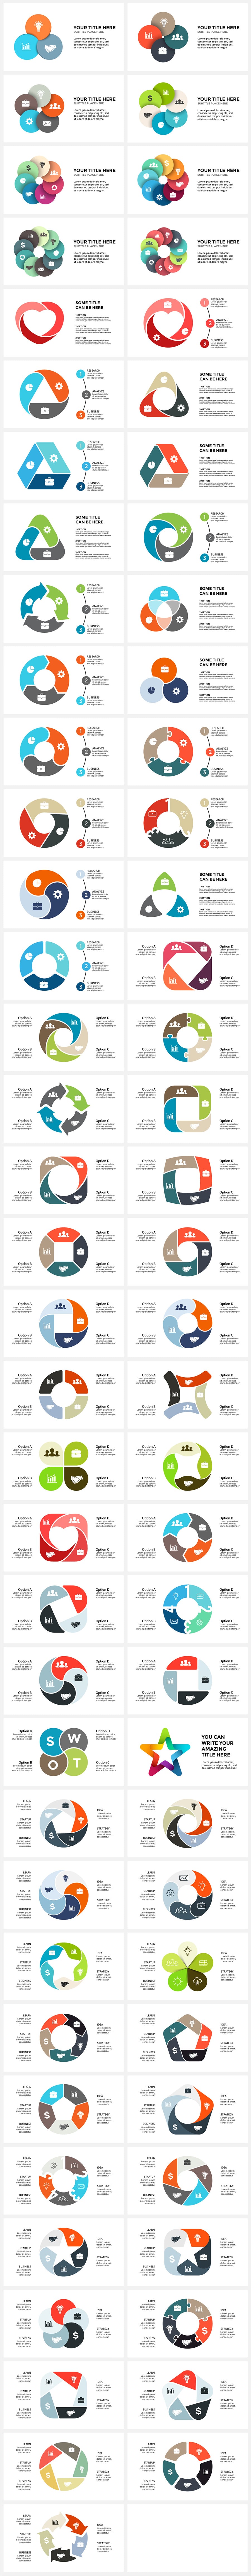 Diagrams Infographic Bundle cover image.